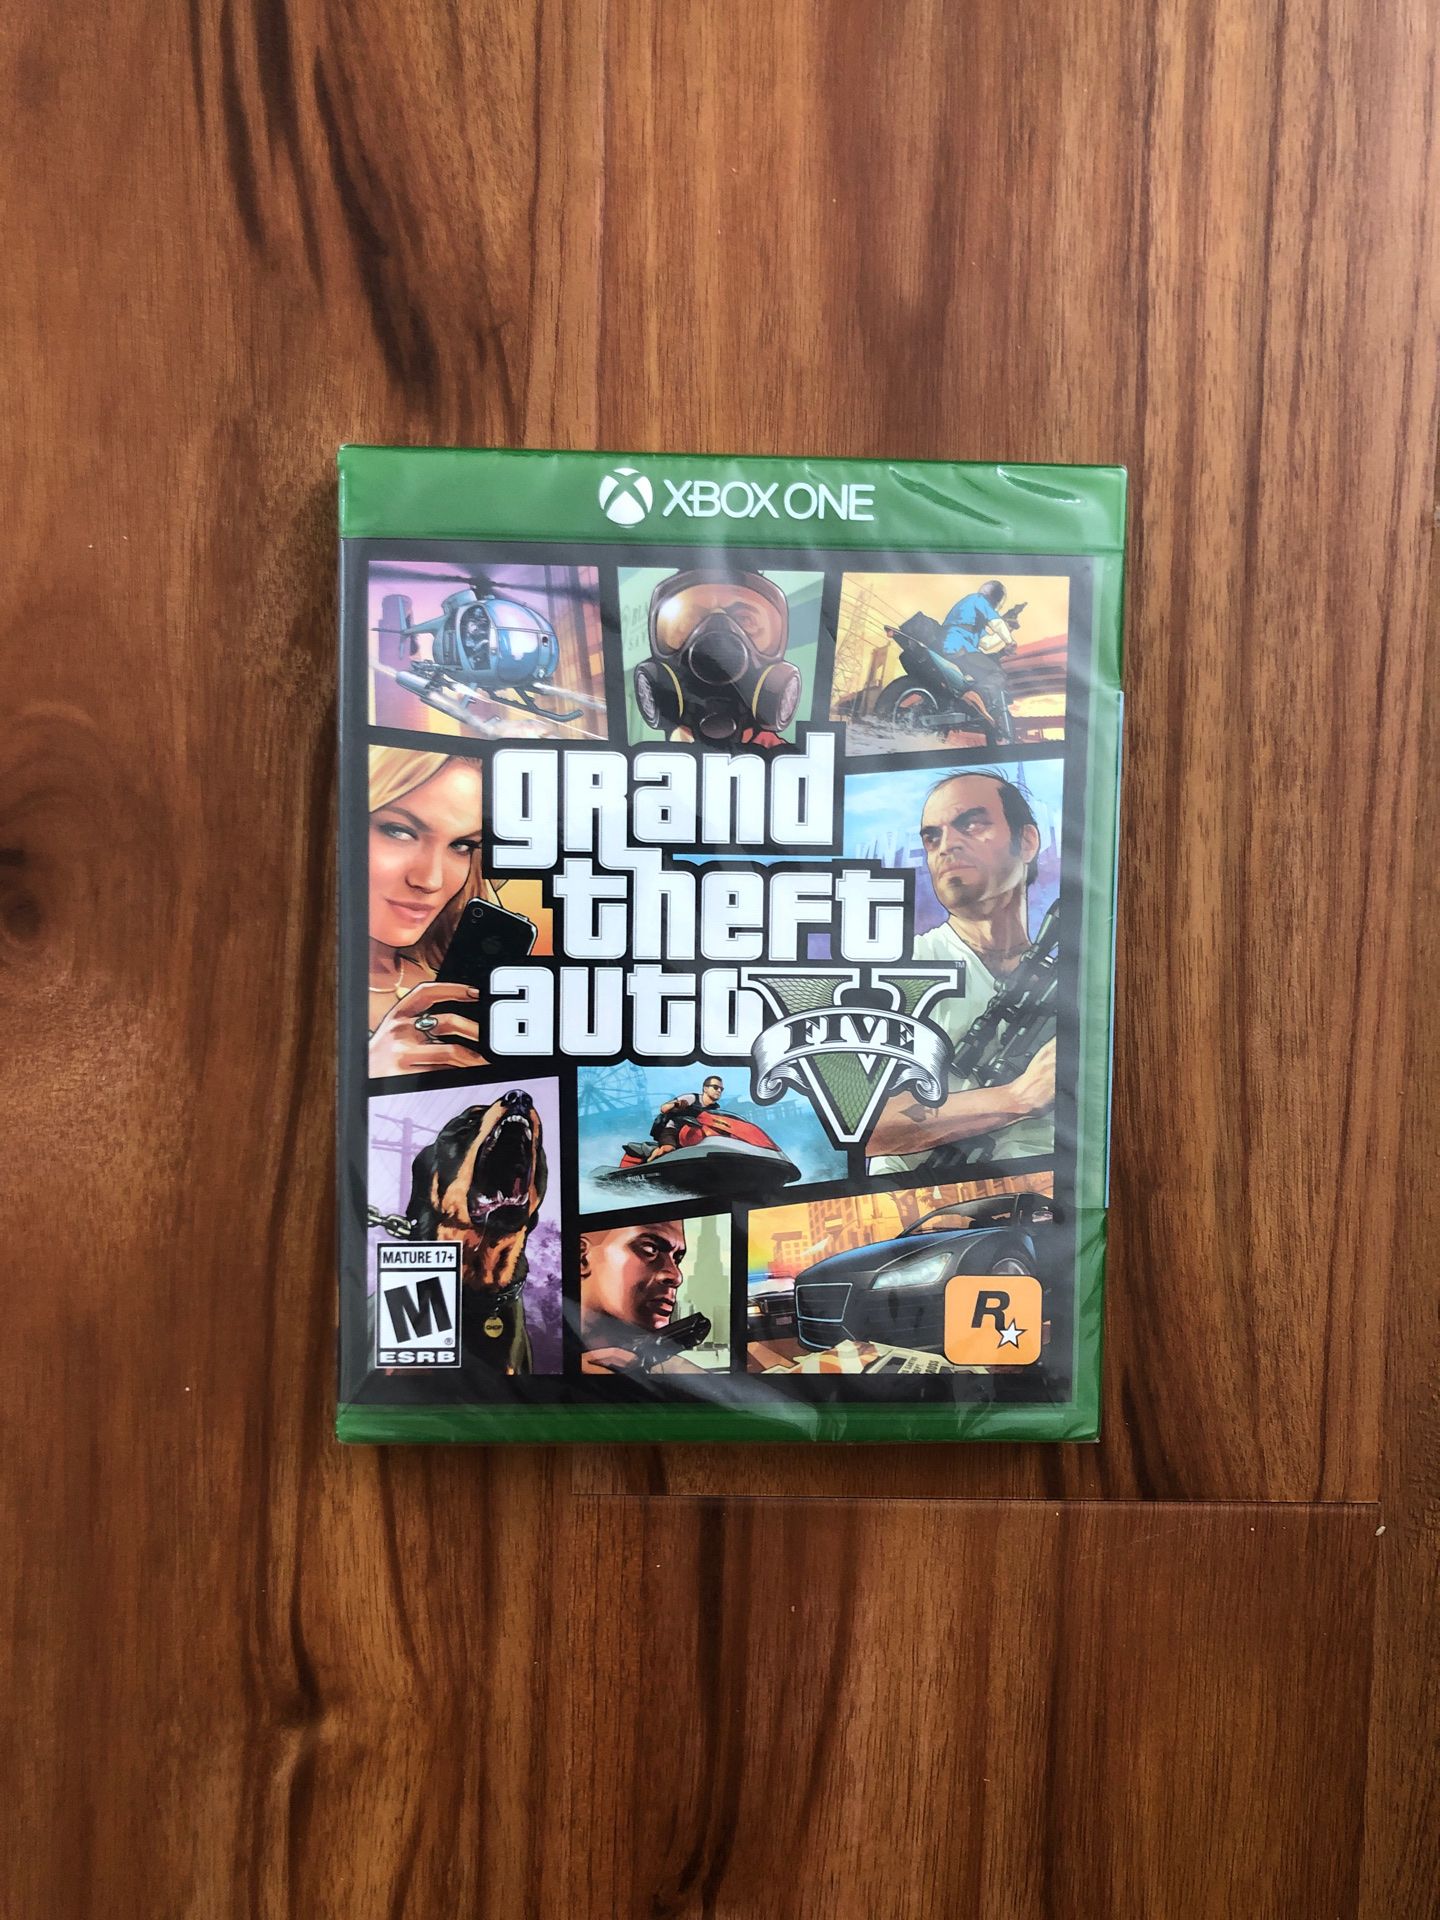 NEVER USED - GTA 5 for Xbox One